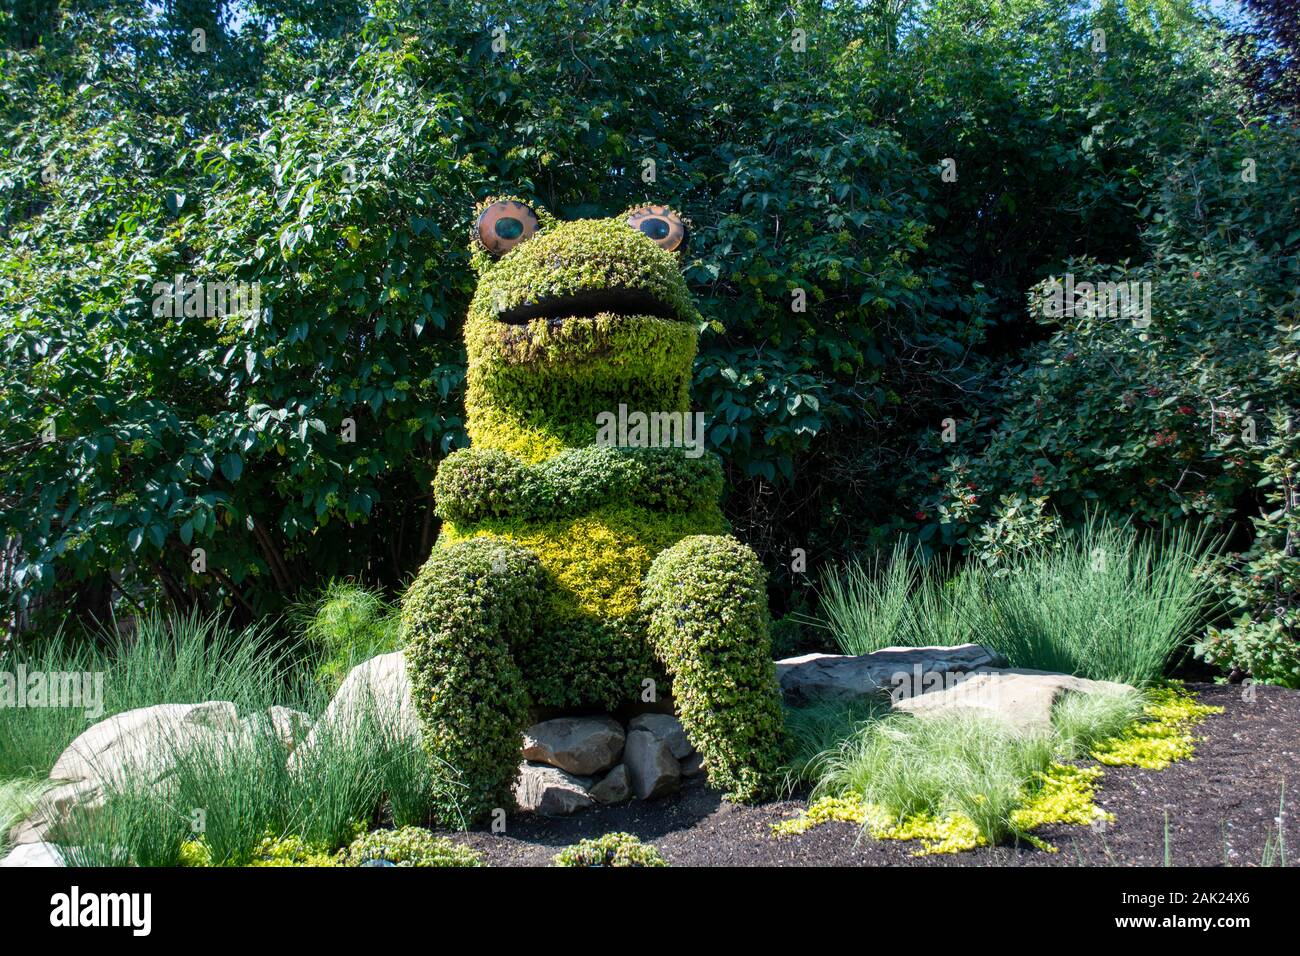 Frog shaped bushed in green landscaped gardens Stock Photo